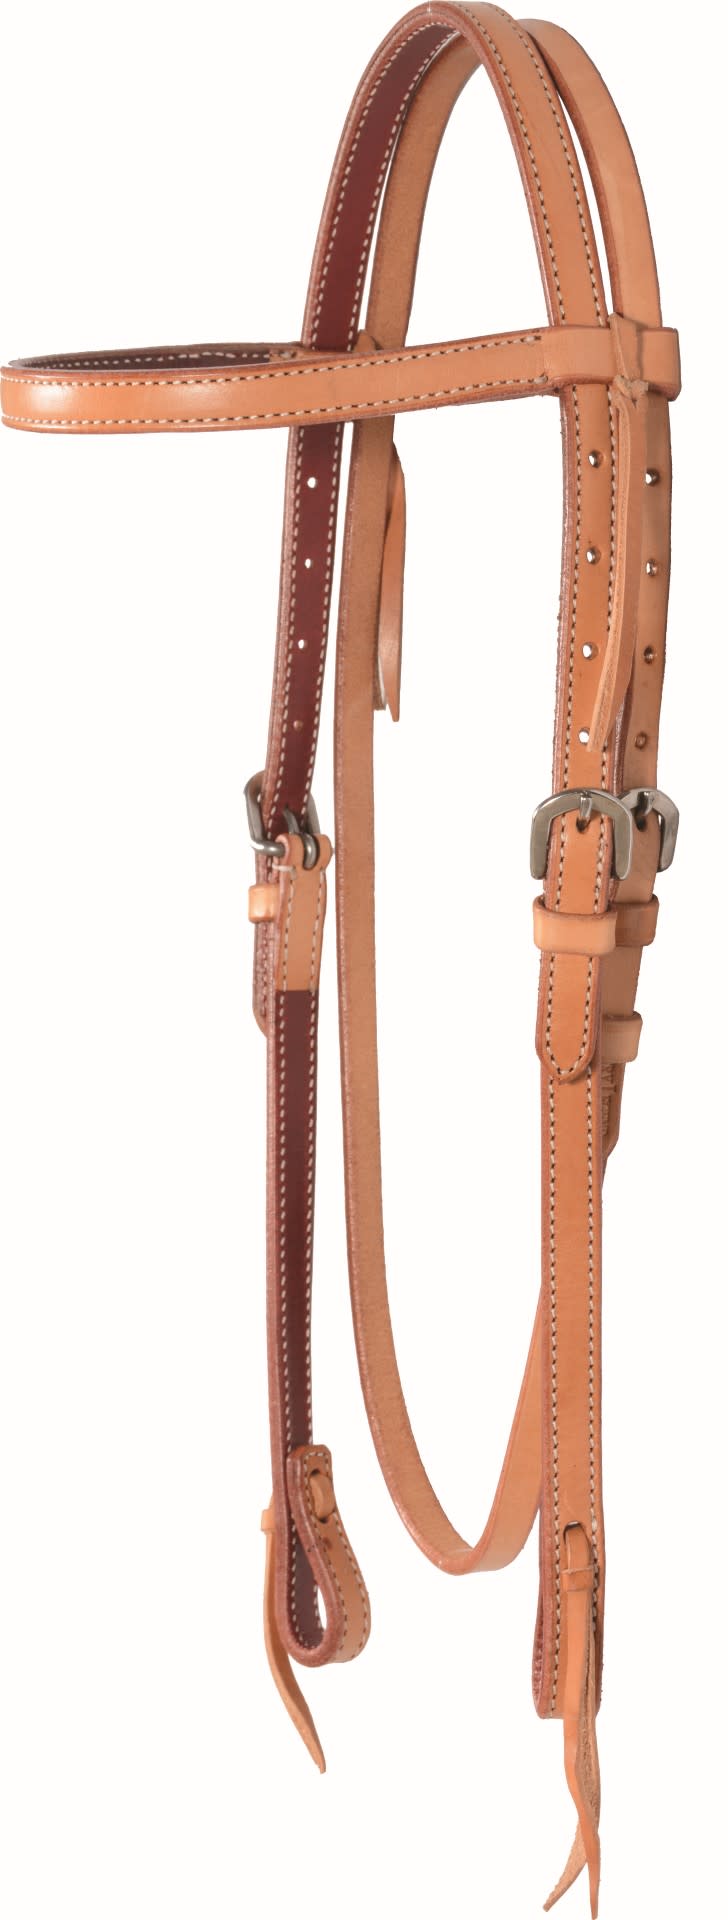 Western Rawhide Country Legend Basic Browband Headstall - Golden Tan